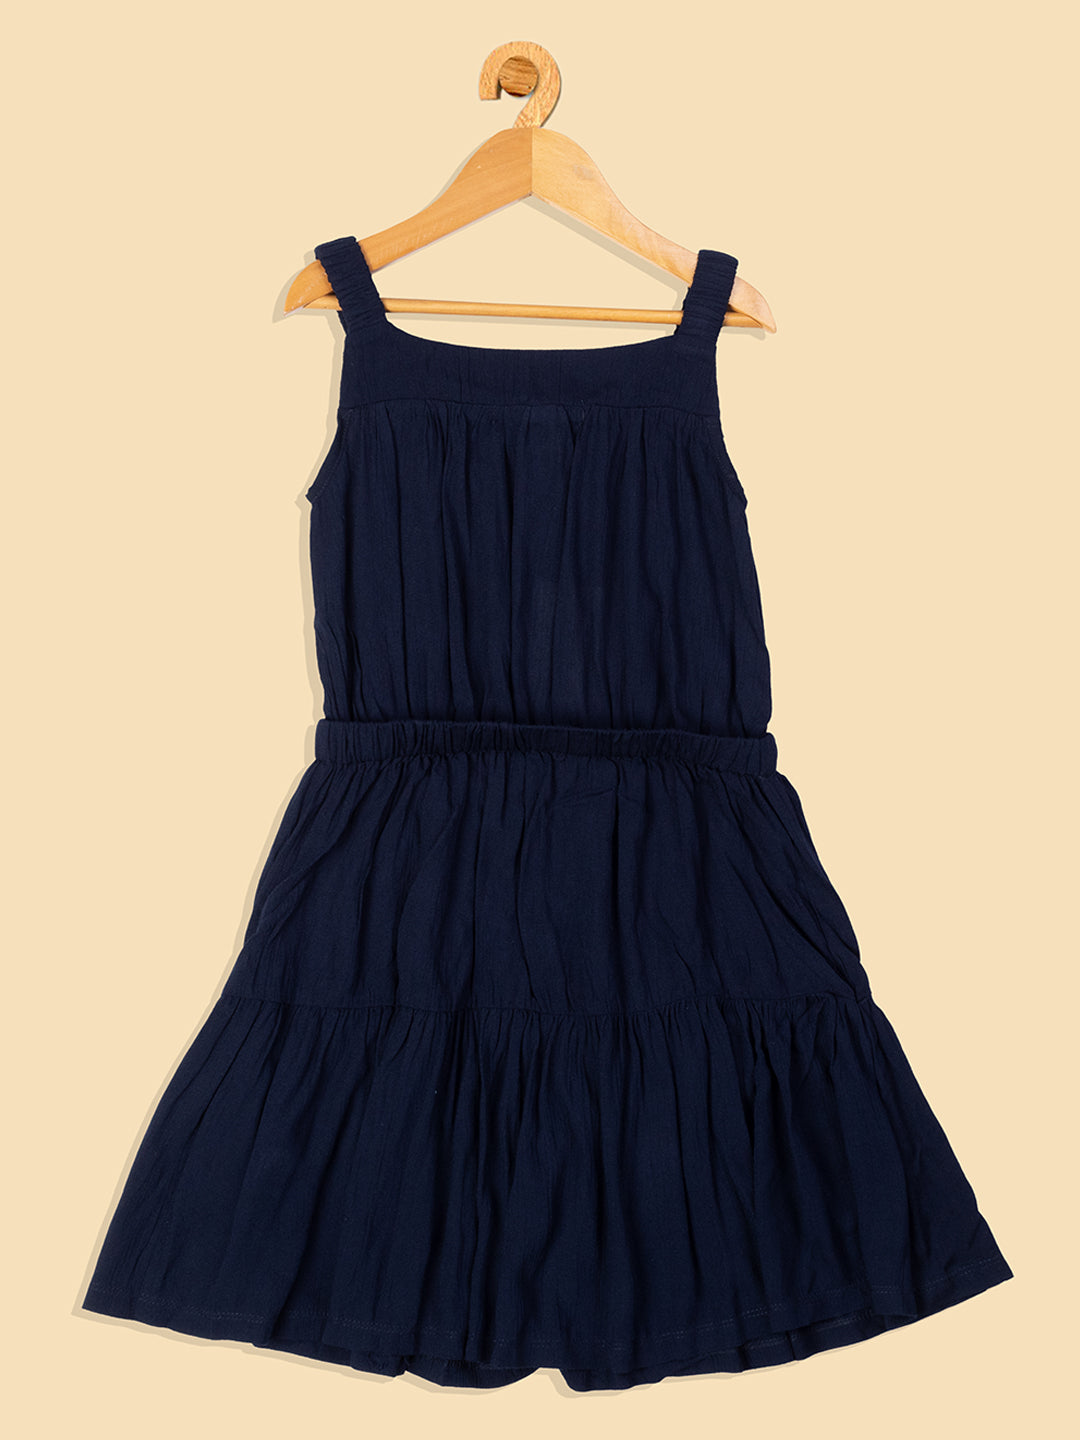 Pampolina  Solid Summer Cotton Dress For Baby Girl With Elastic Belt -Navy